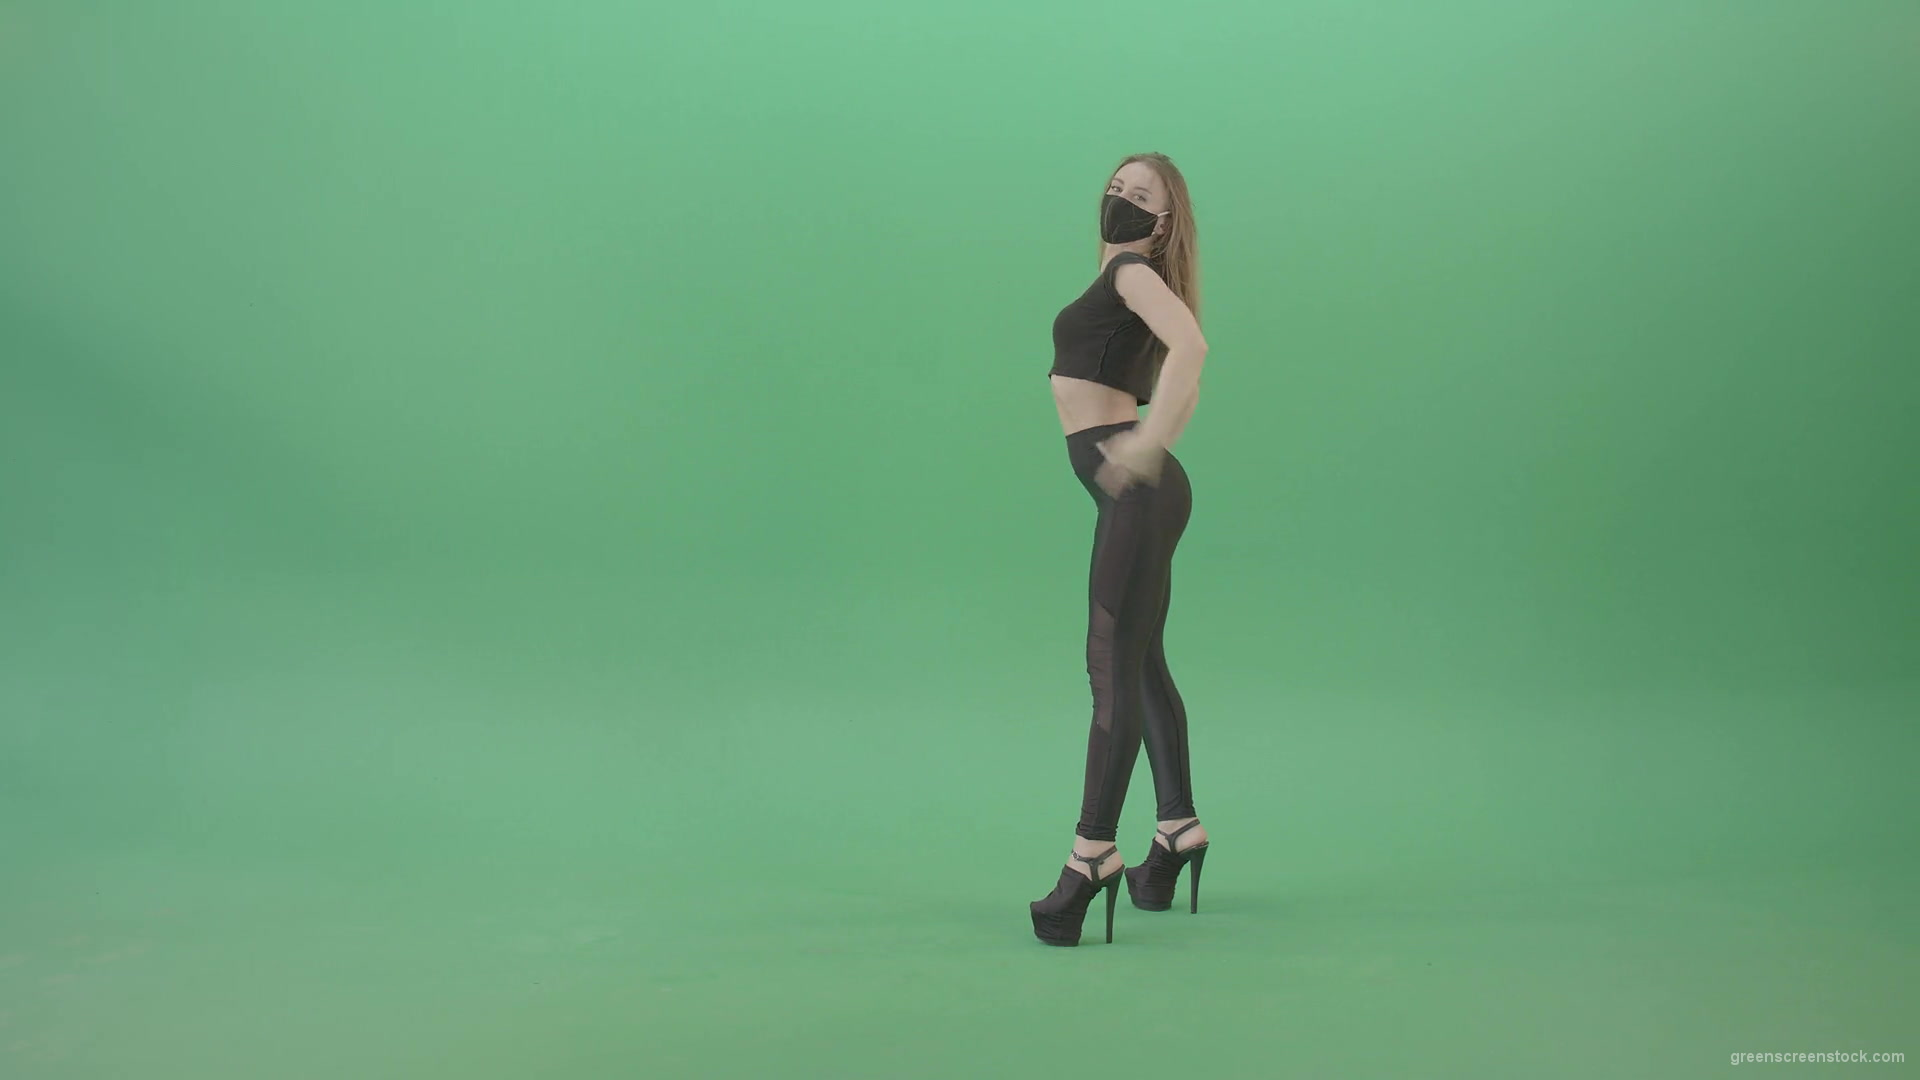 Sexy-girl-in-black-mask-and-costume-dancing-with-erotic-moves-isolated-on-green-screen-4K-video-footage-1920_005 Green Screen Stock